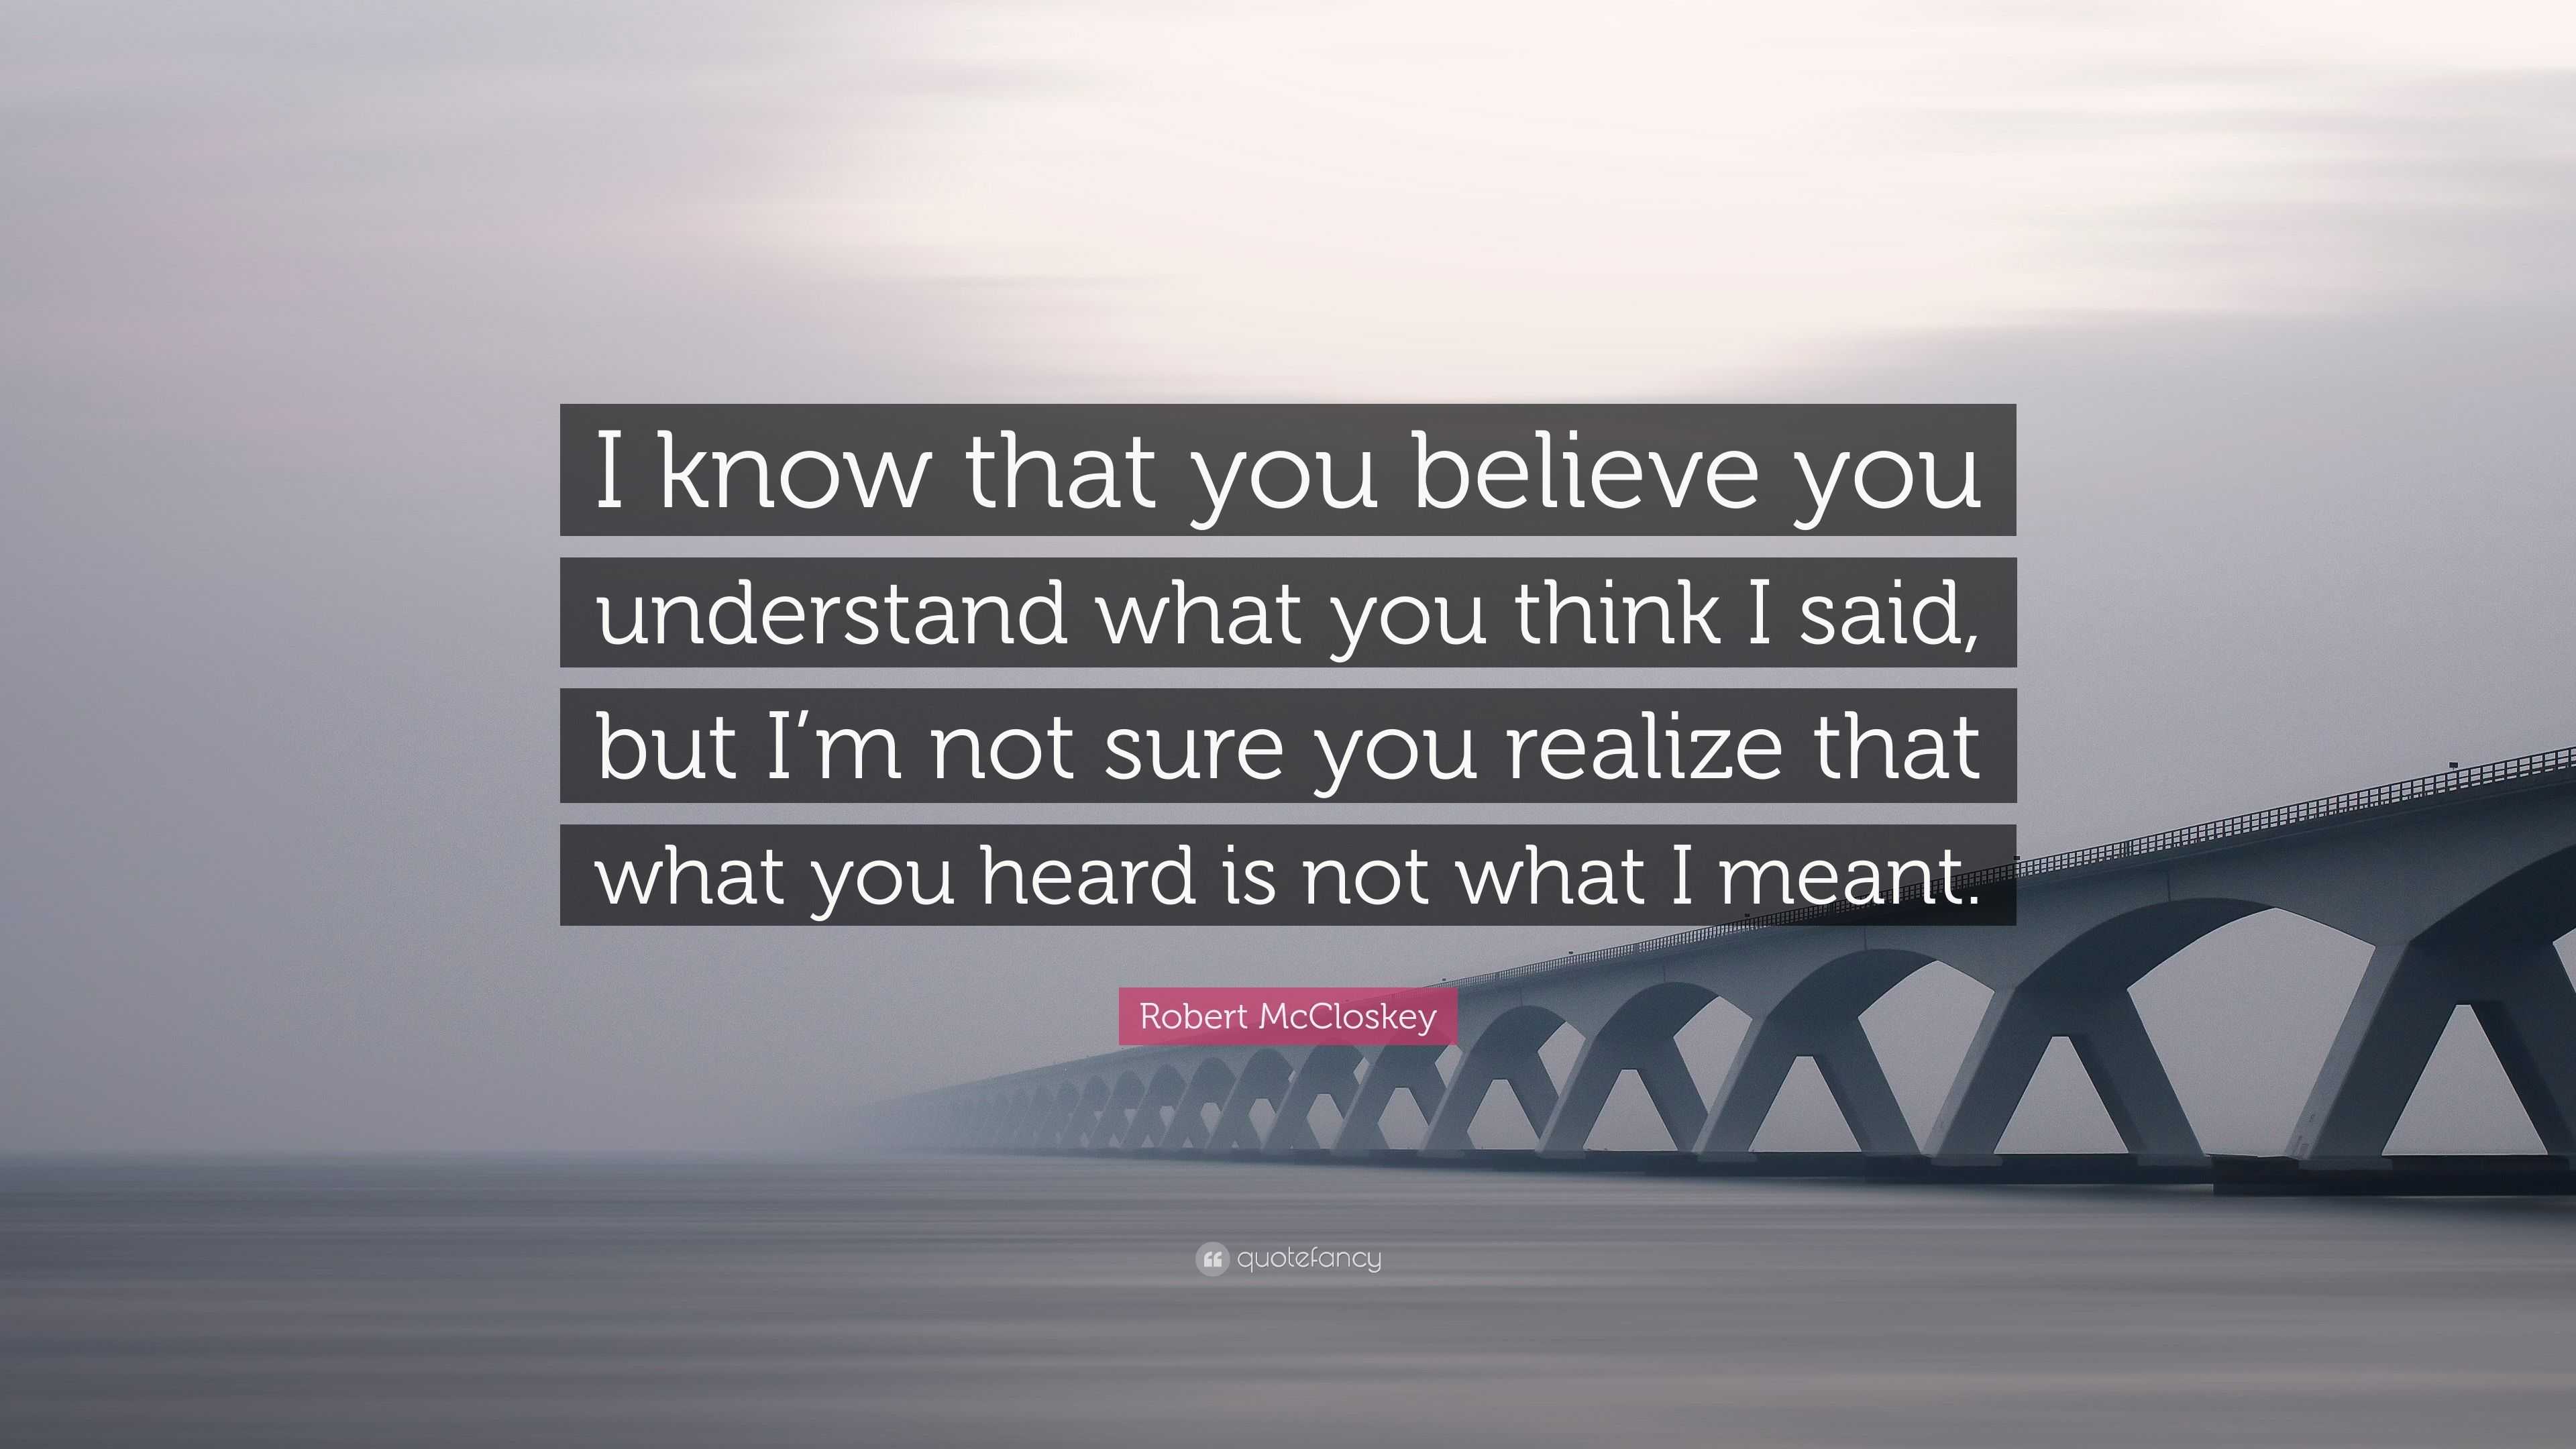 Robert McCloskey Quote: “I know that you believe you understand what